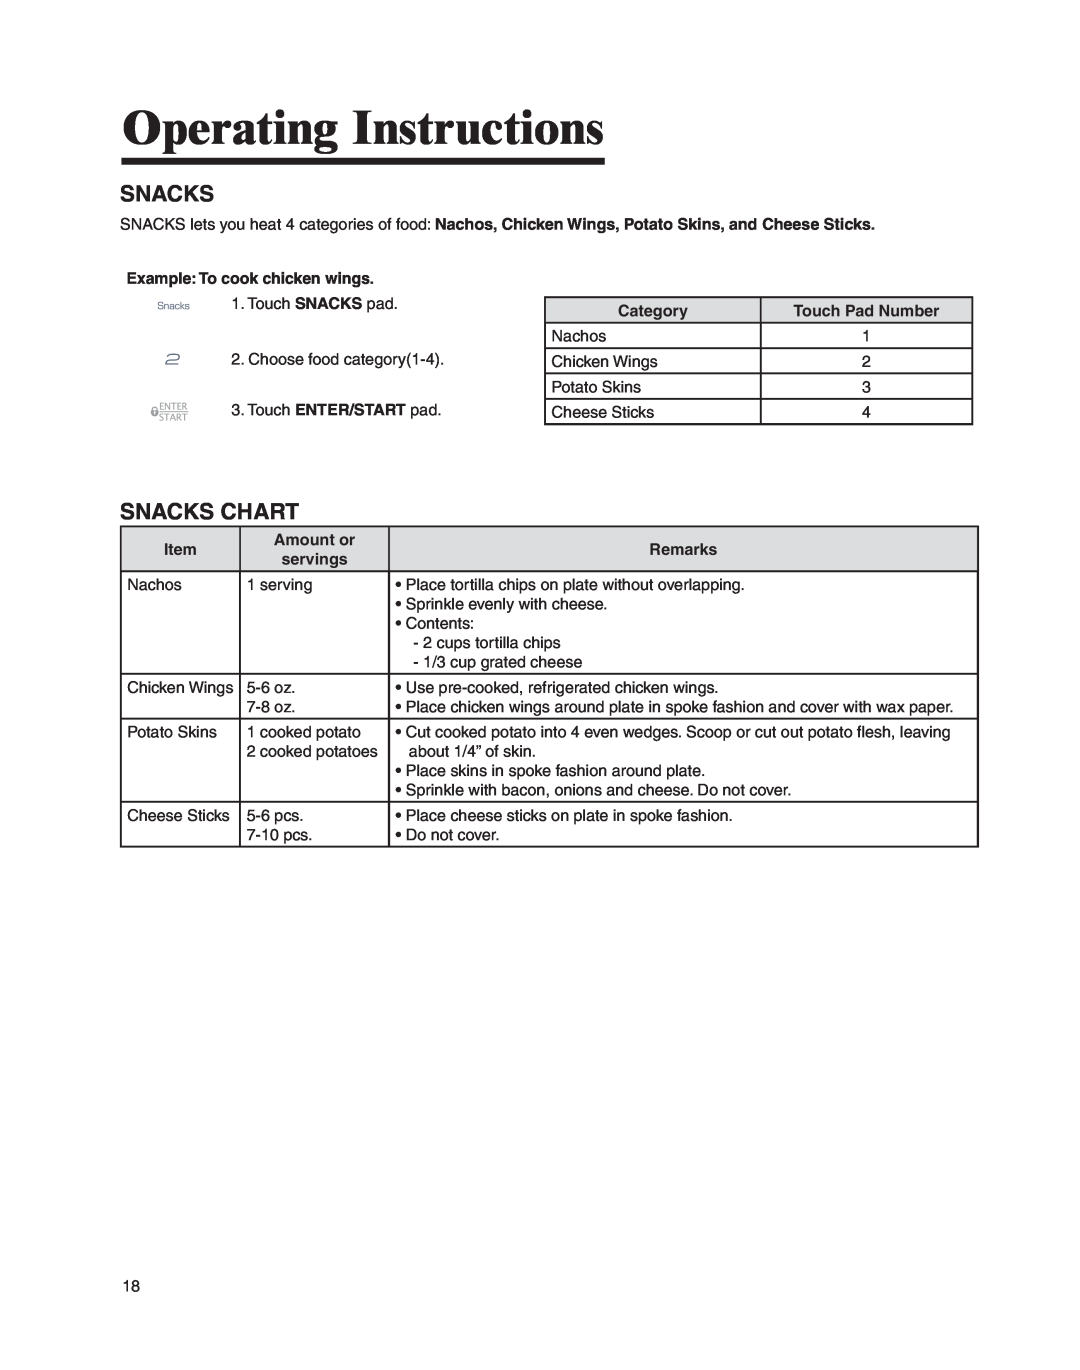 Whirlpool MMV4205BA important safety instructions Snacks Chart, Operating Instructions 